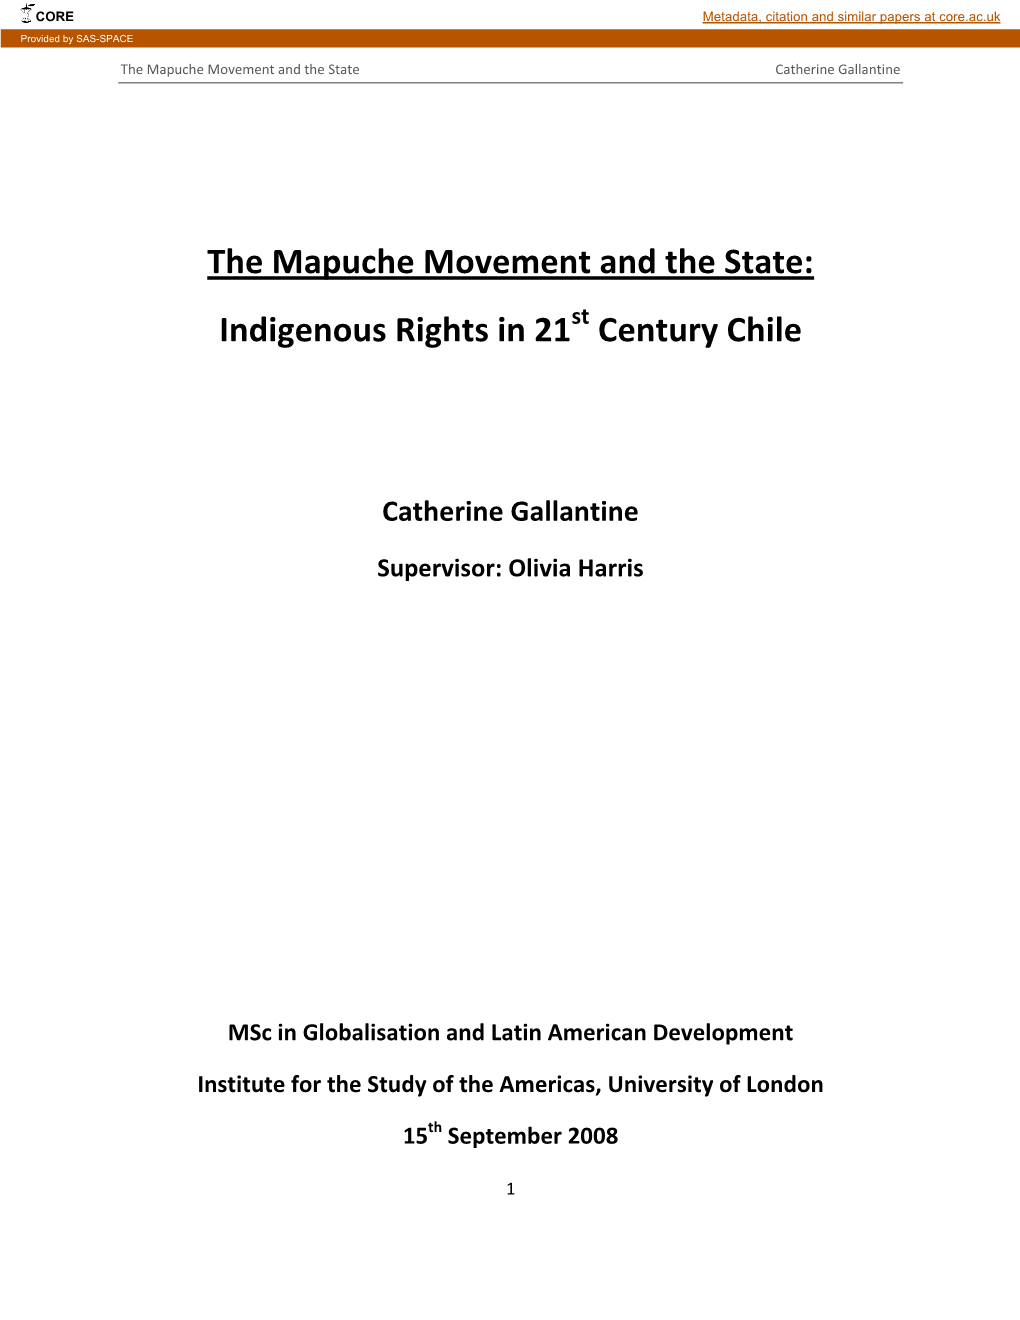 The Mapuche Movement and the State: Indigenous Rights in 21St Century Chile